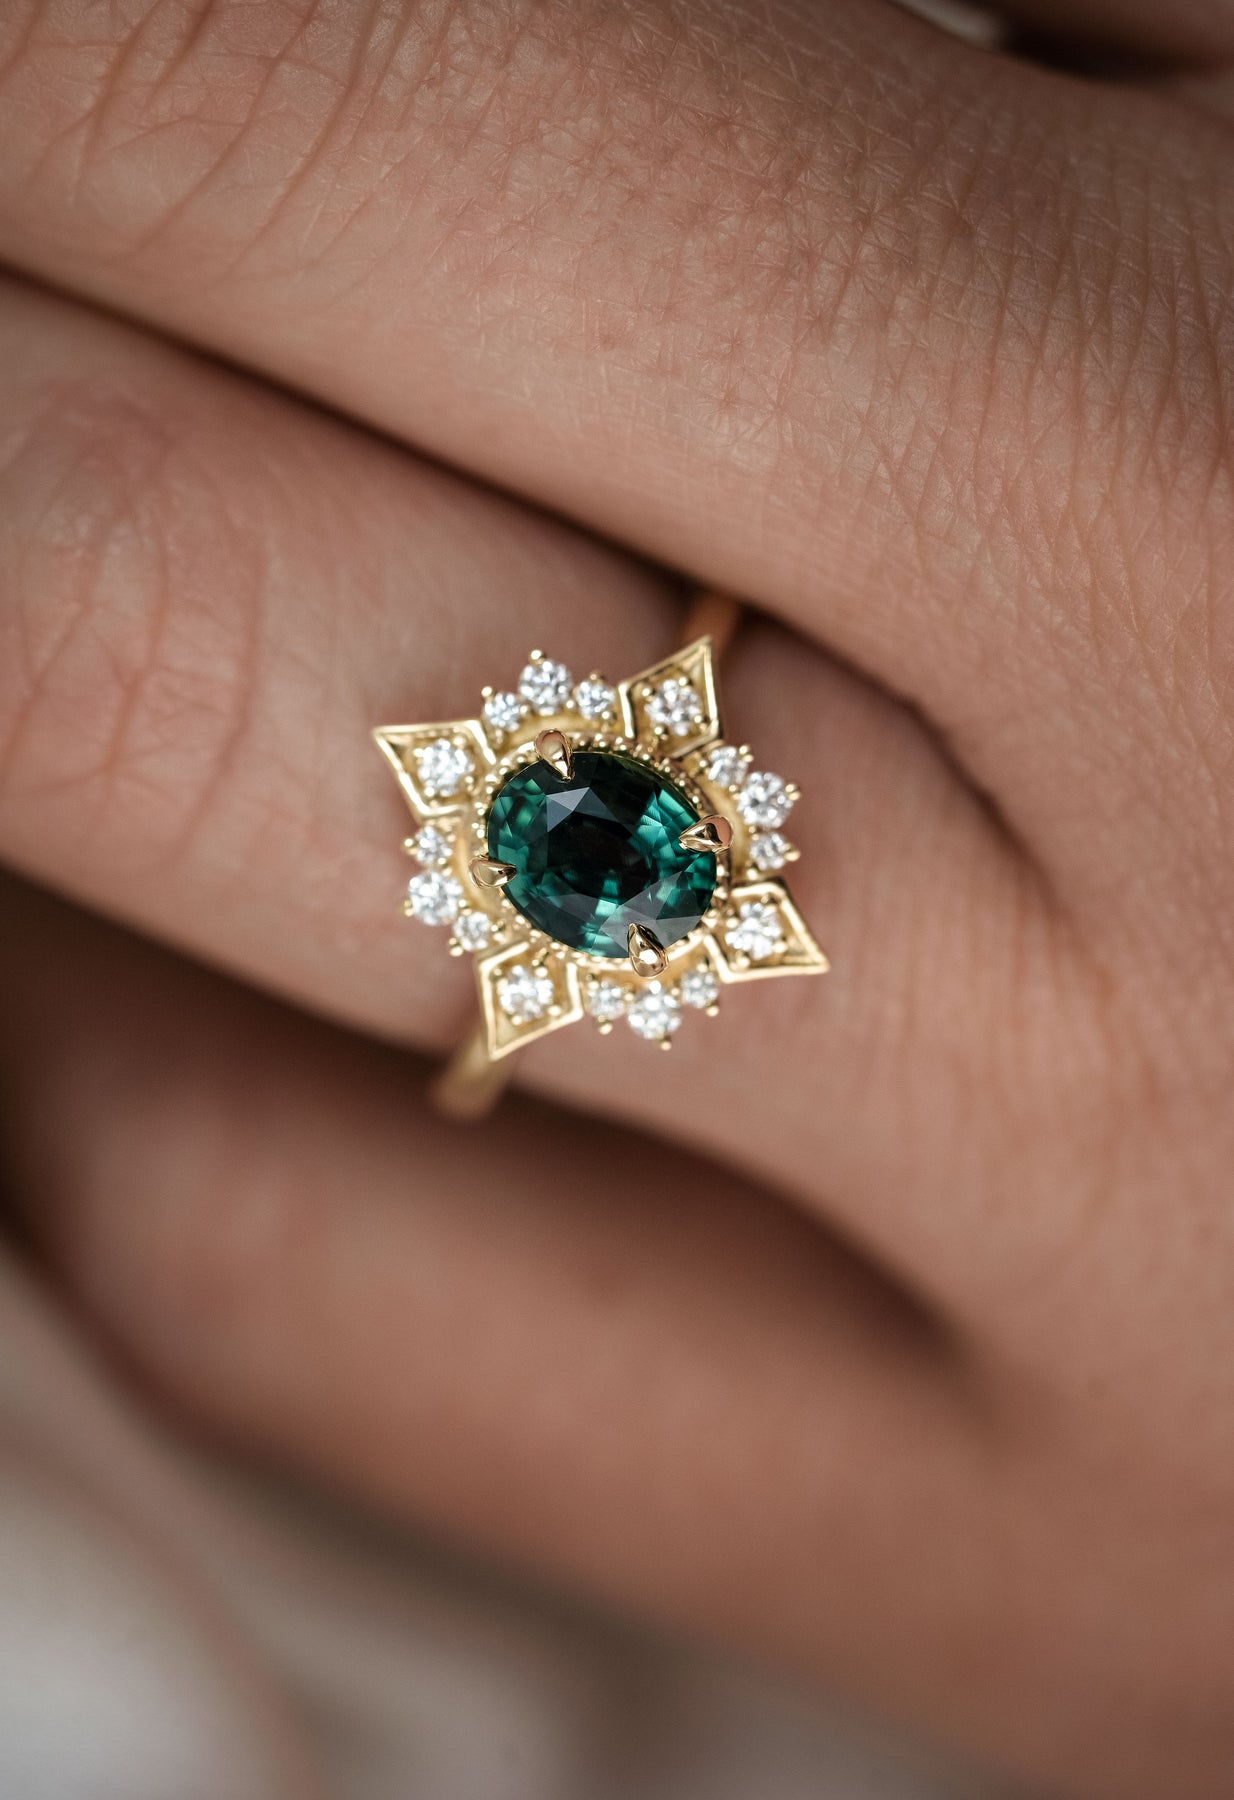 The Theia 1.52 CT Oval Teal Sapphire Ring – Lavender Creek Gems